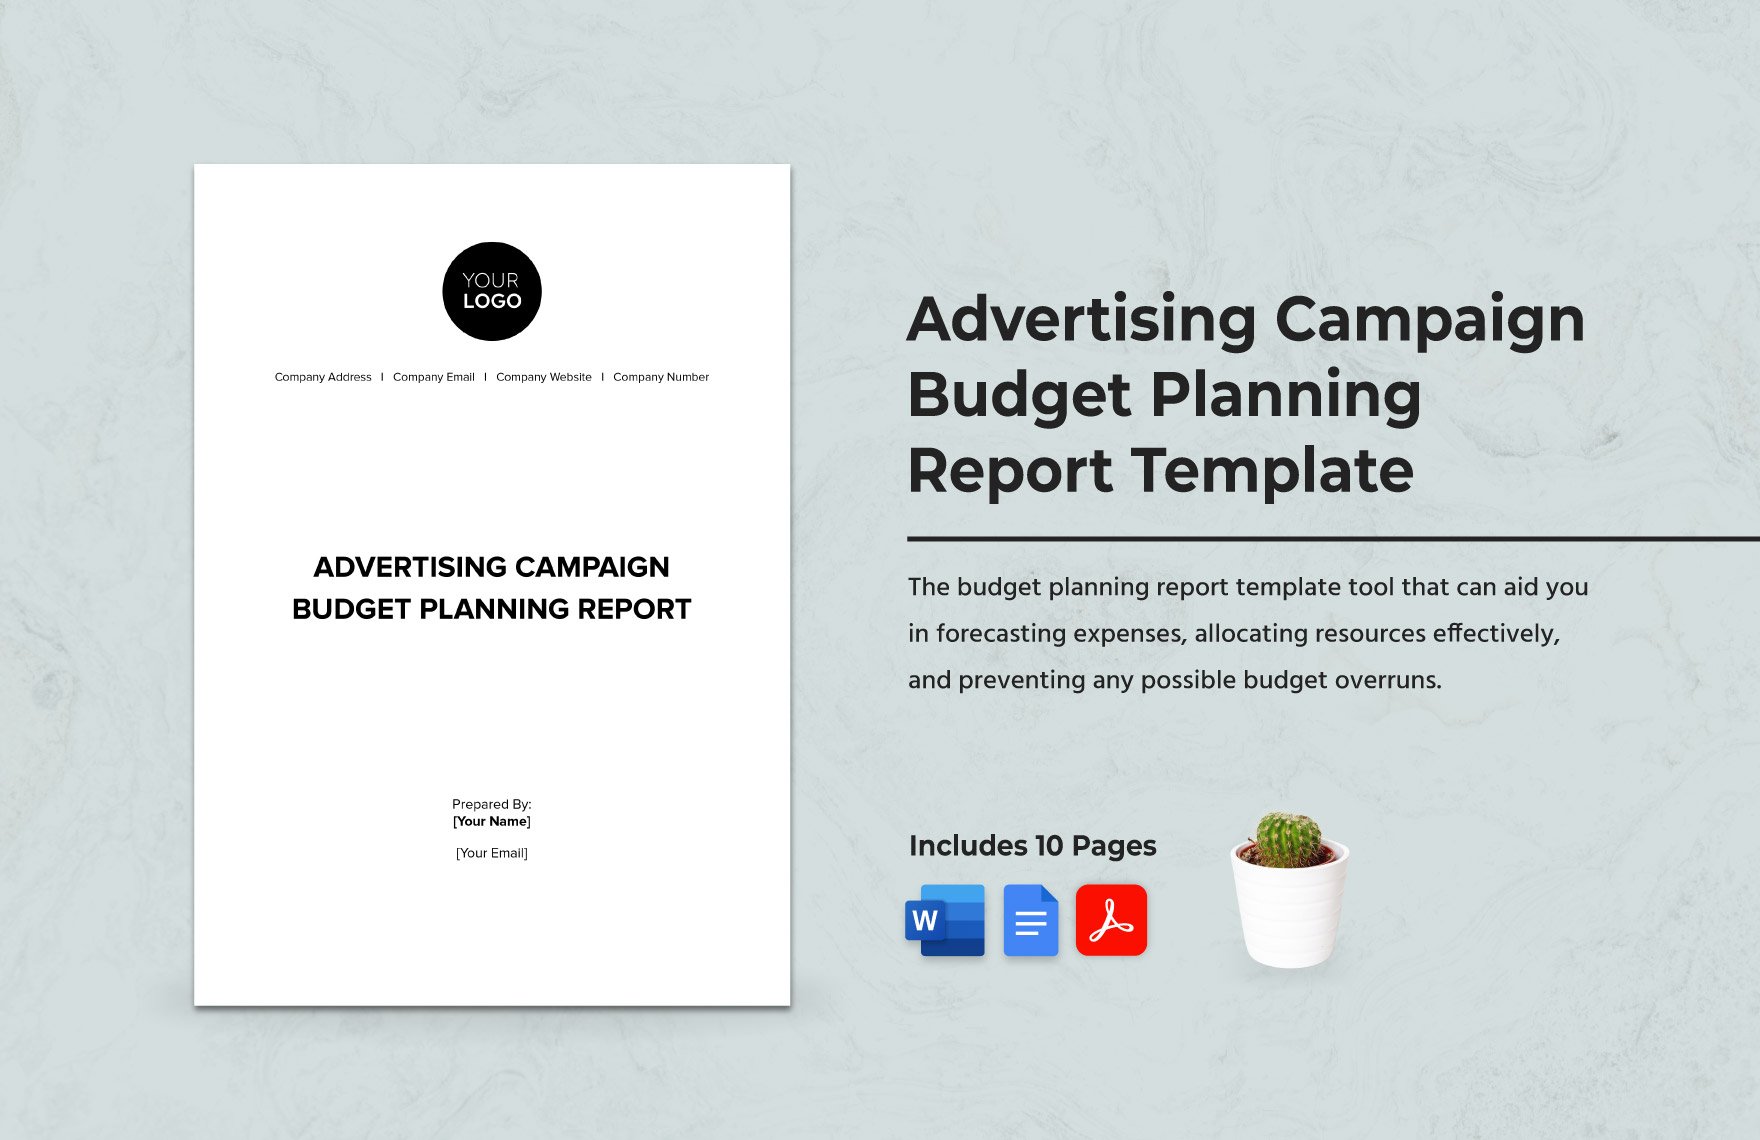 Advertising Campaign Budget Planning Report Template in Word, Google Docs, PDF